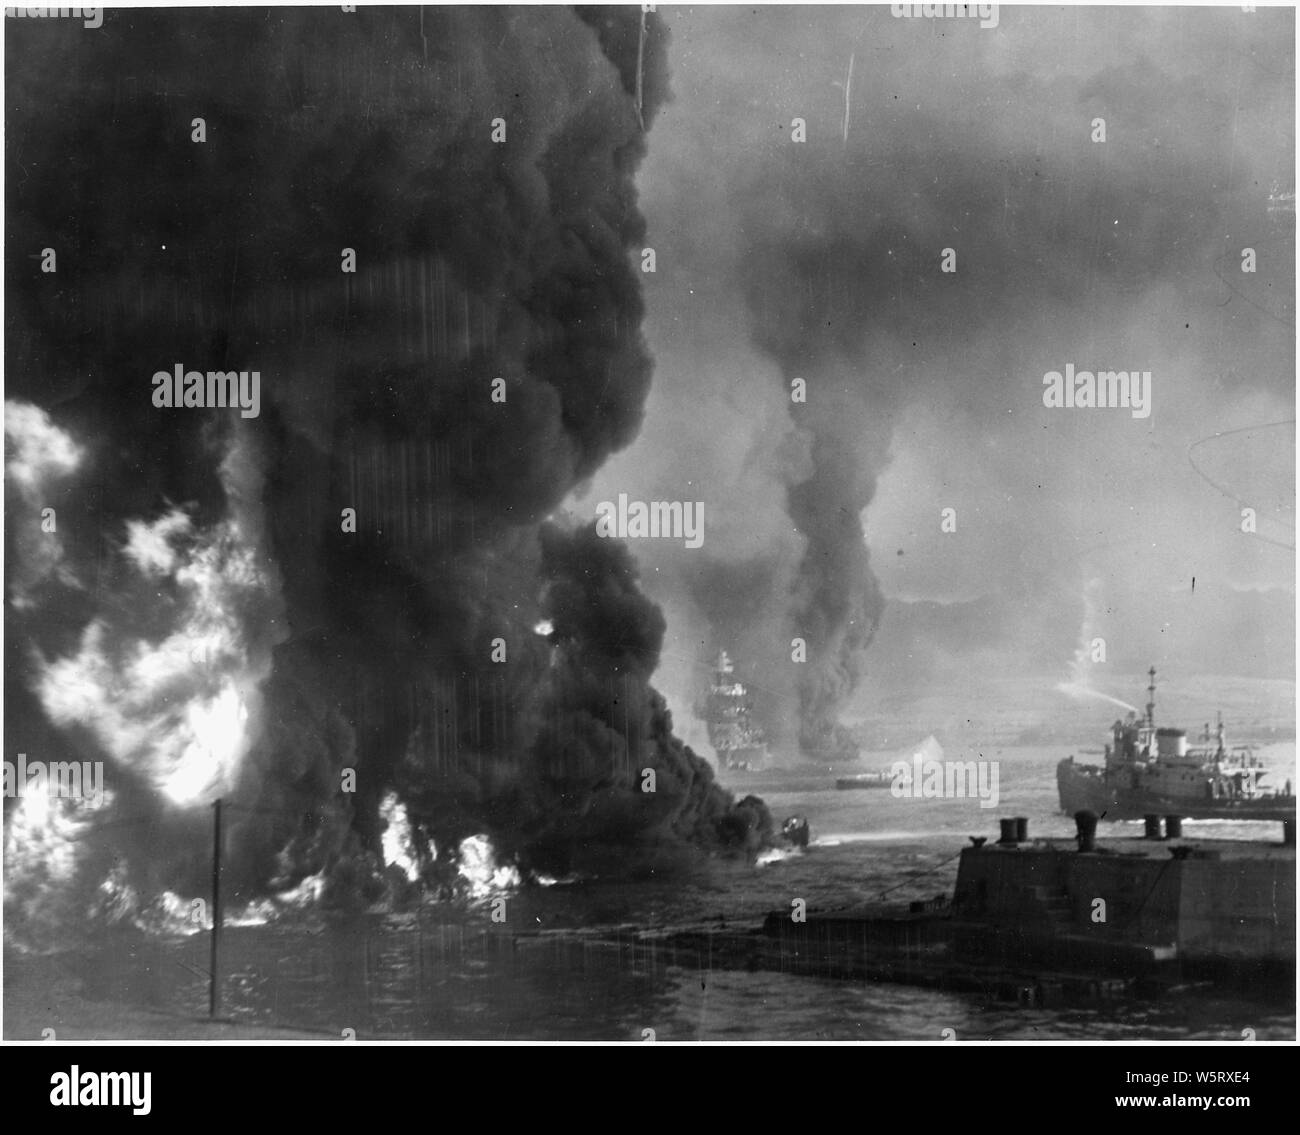 Naval photograph documenting the Japanese attack on Pearl Harbor, Hawaii which initiated US participation in World War II. Navy's caption: Oil burning on top of the water near the Naval Air Station at Pearl Harbor after the Japanese attack on Dec. 7, 1941.; Scope and content:  This photograph was originally taken by a Naval photographer immediately after the Japanese attack on Pearl Harbor, but came to be filed in a writ of application for habeas corpus case (number 298) tried in the US District Court, District of Hawaii in 1944. The case, In Re Lloyd C. Duncan related to imposition of martial Stock Photo